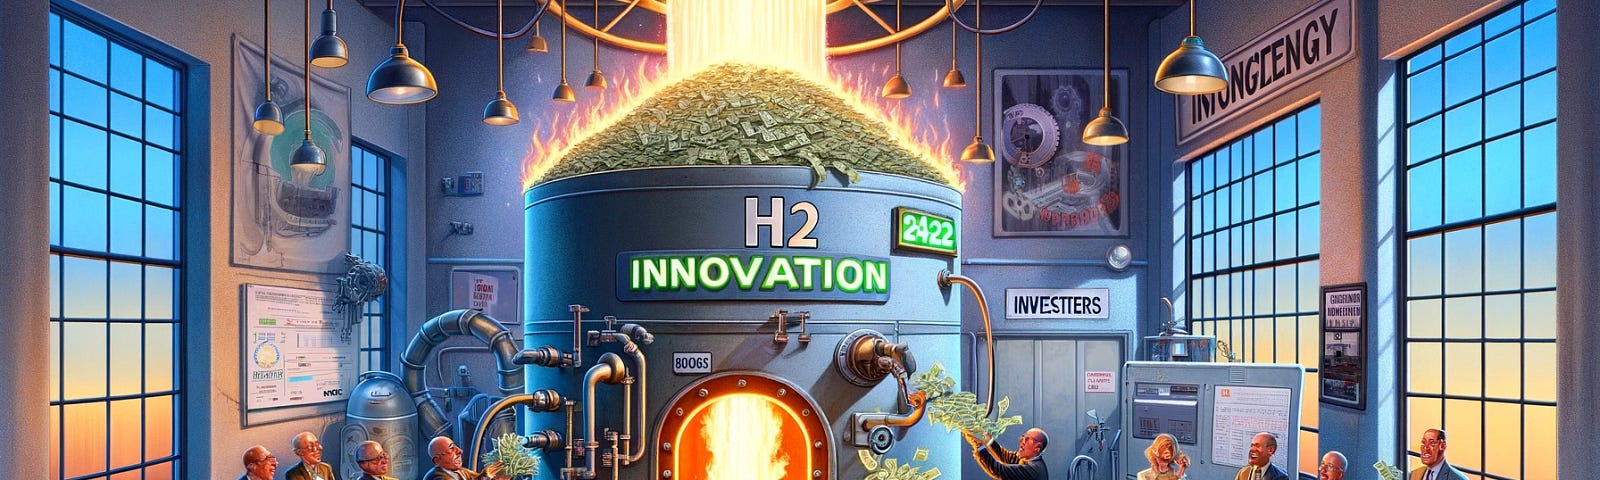 ChatGPT & DALL-E generated panoramic satirical image depicting a hydrogen economy firm taking money from investors and burning it.